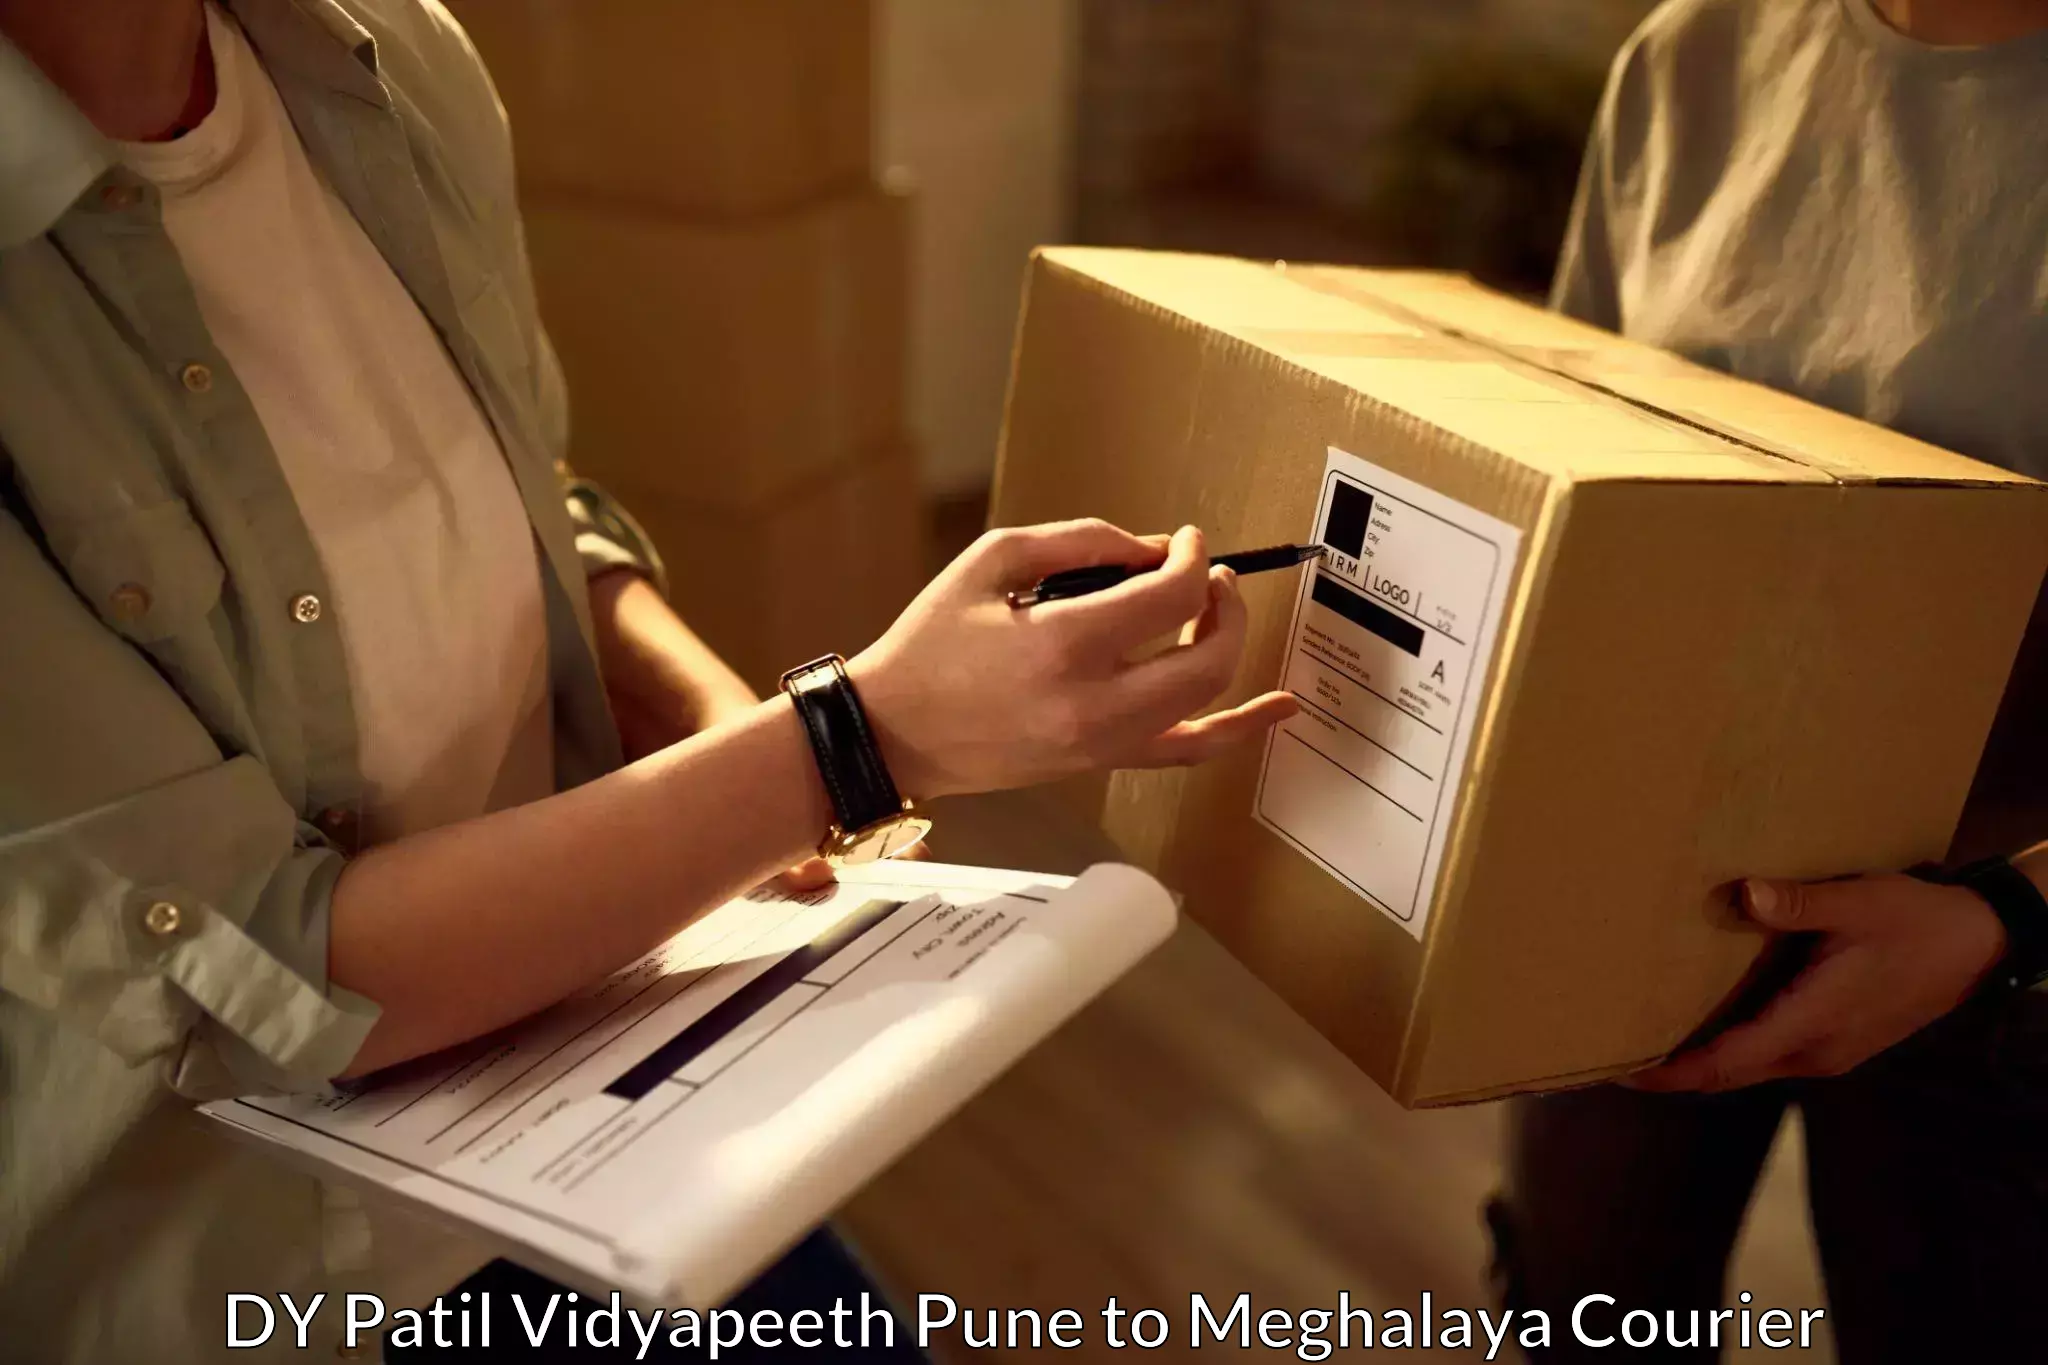 Tech-enabled shipping in DY Patil Vidyapeeth Pune to Phulbari